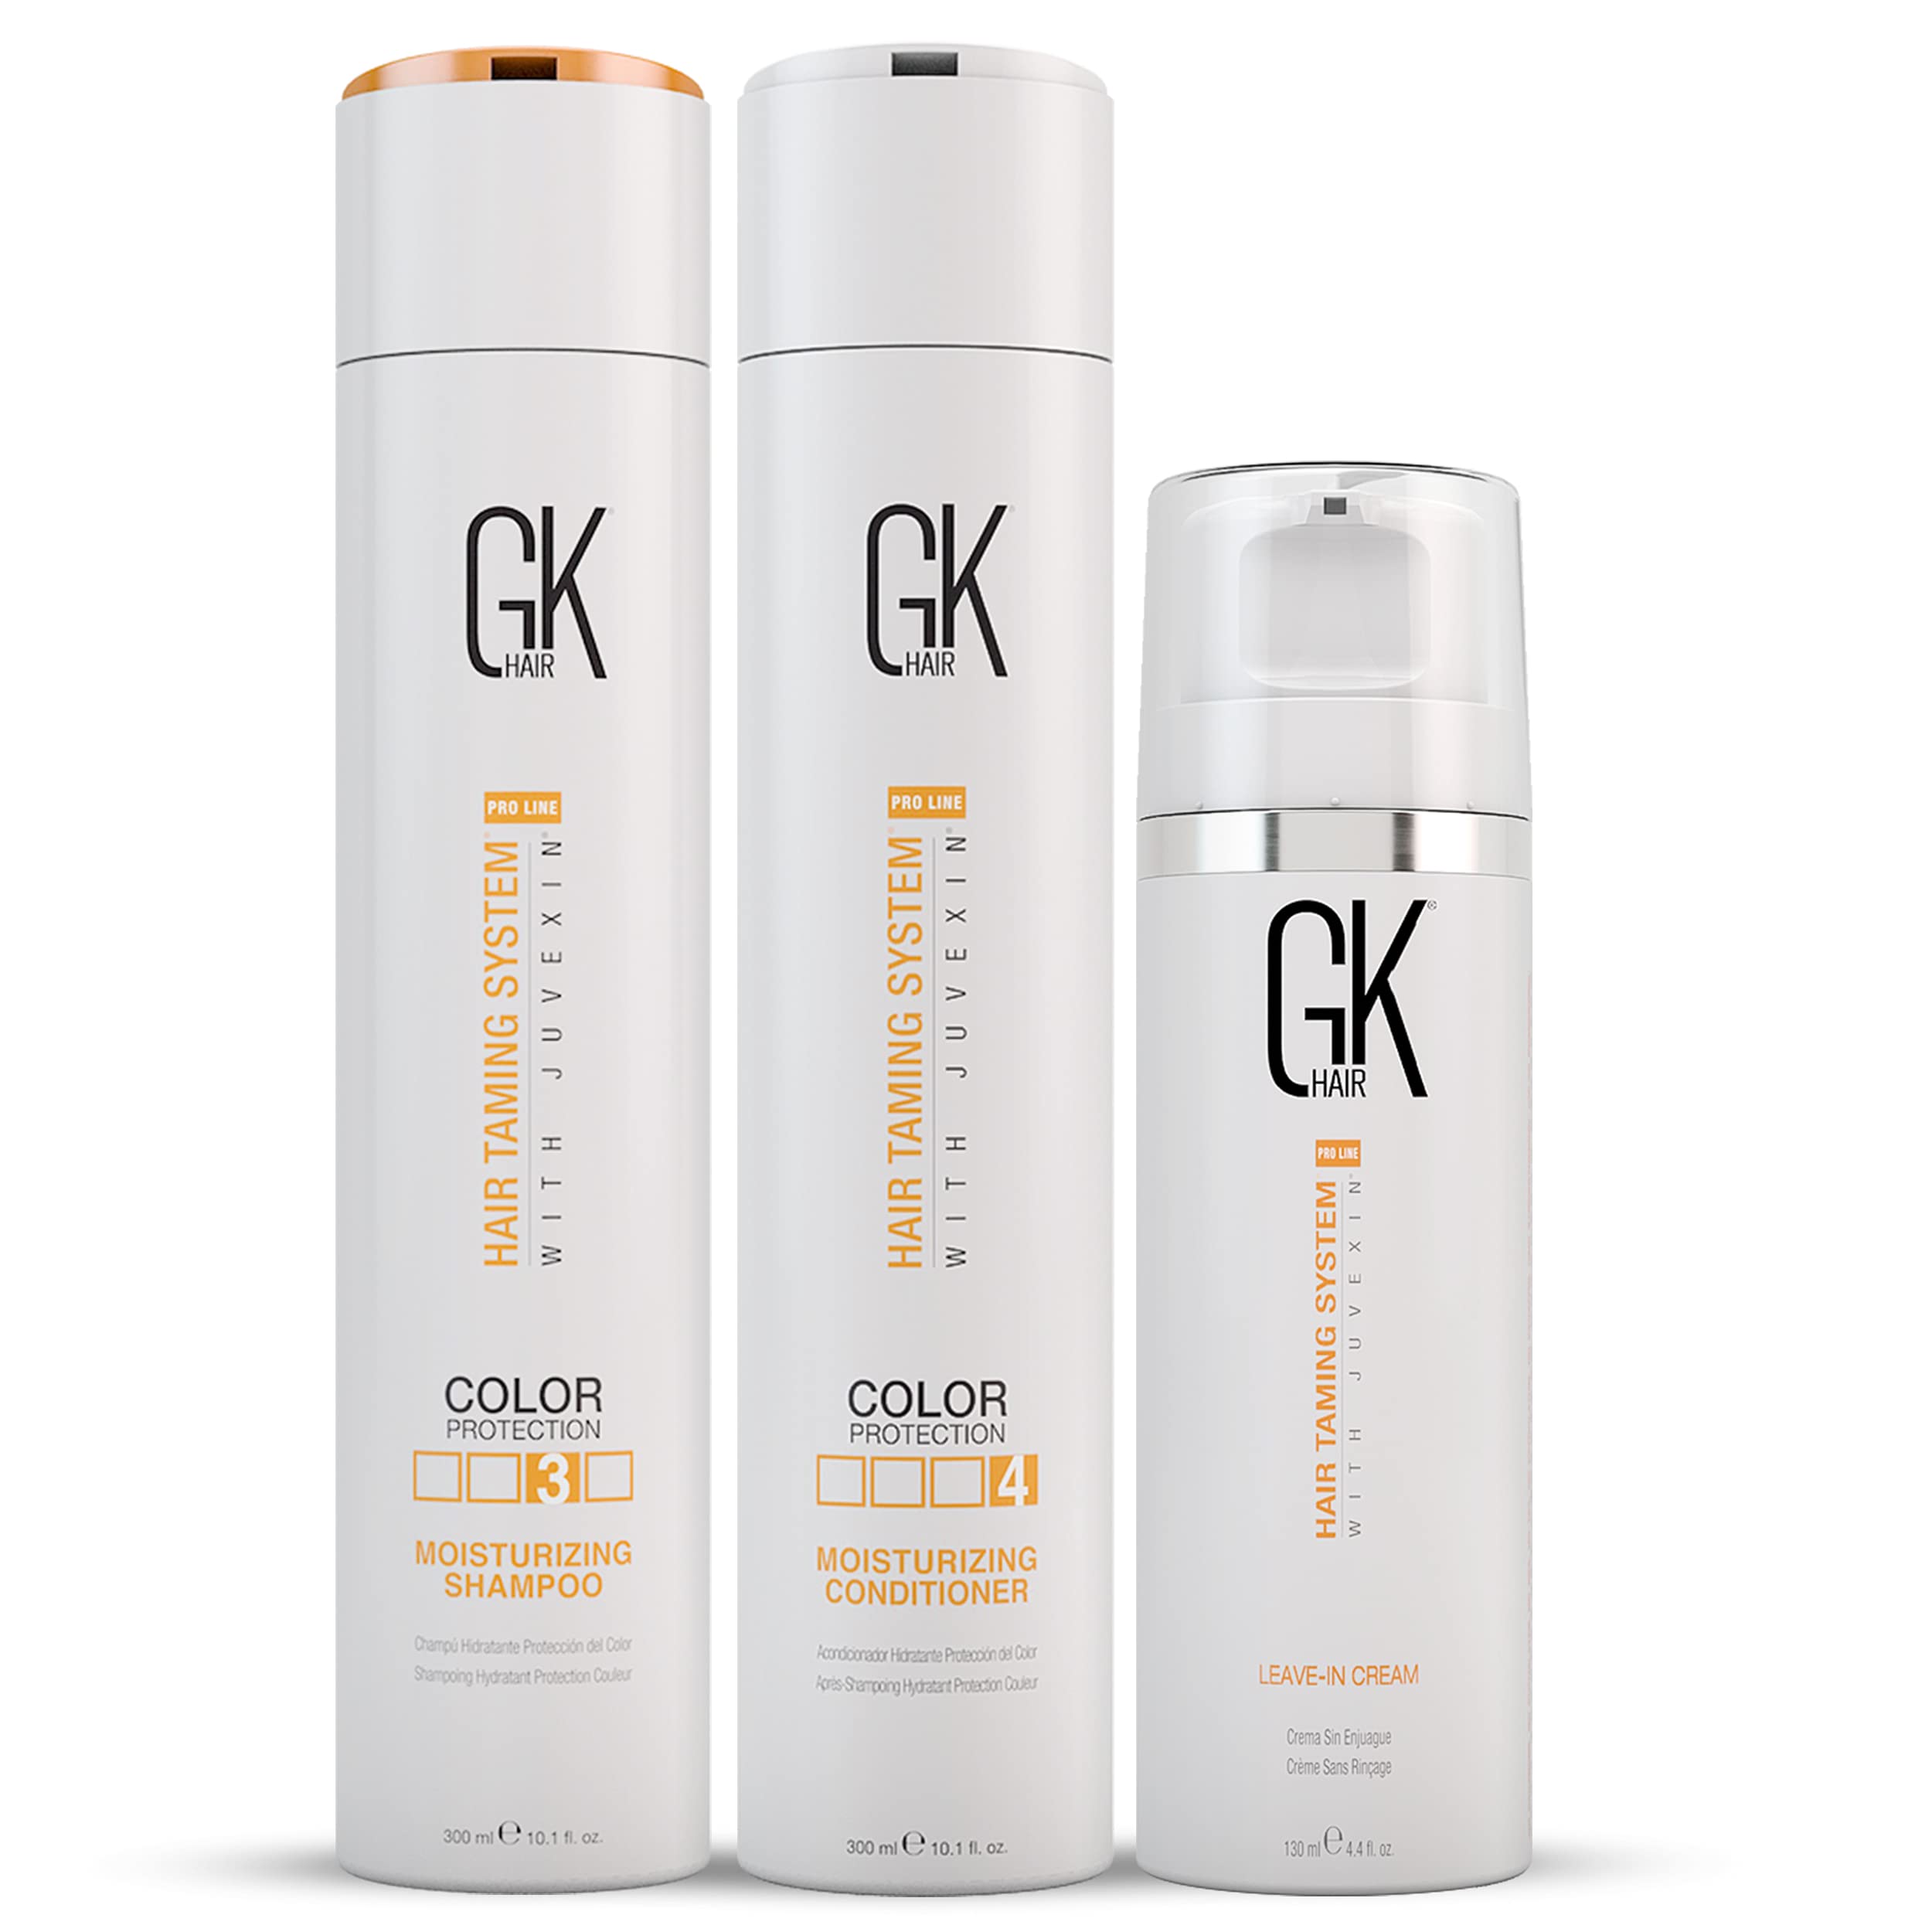 Global Keratin GK Hair Moisturizing Shampoo and Conditioner 300ml Set I Leave in Conditioner Cream 130ml For Detangling Smoothing Strengthening